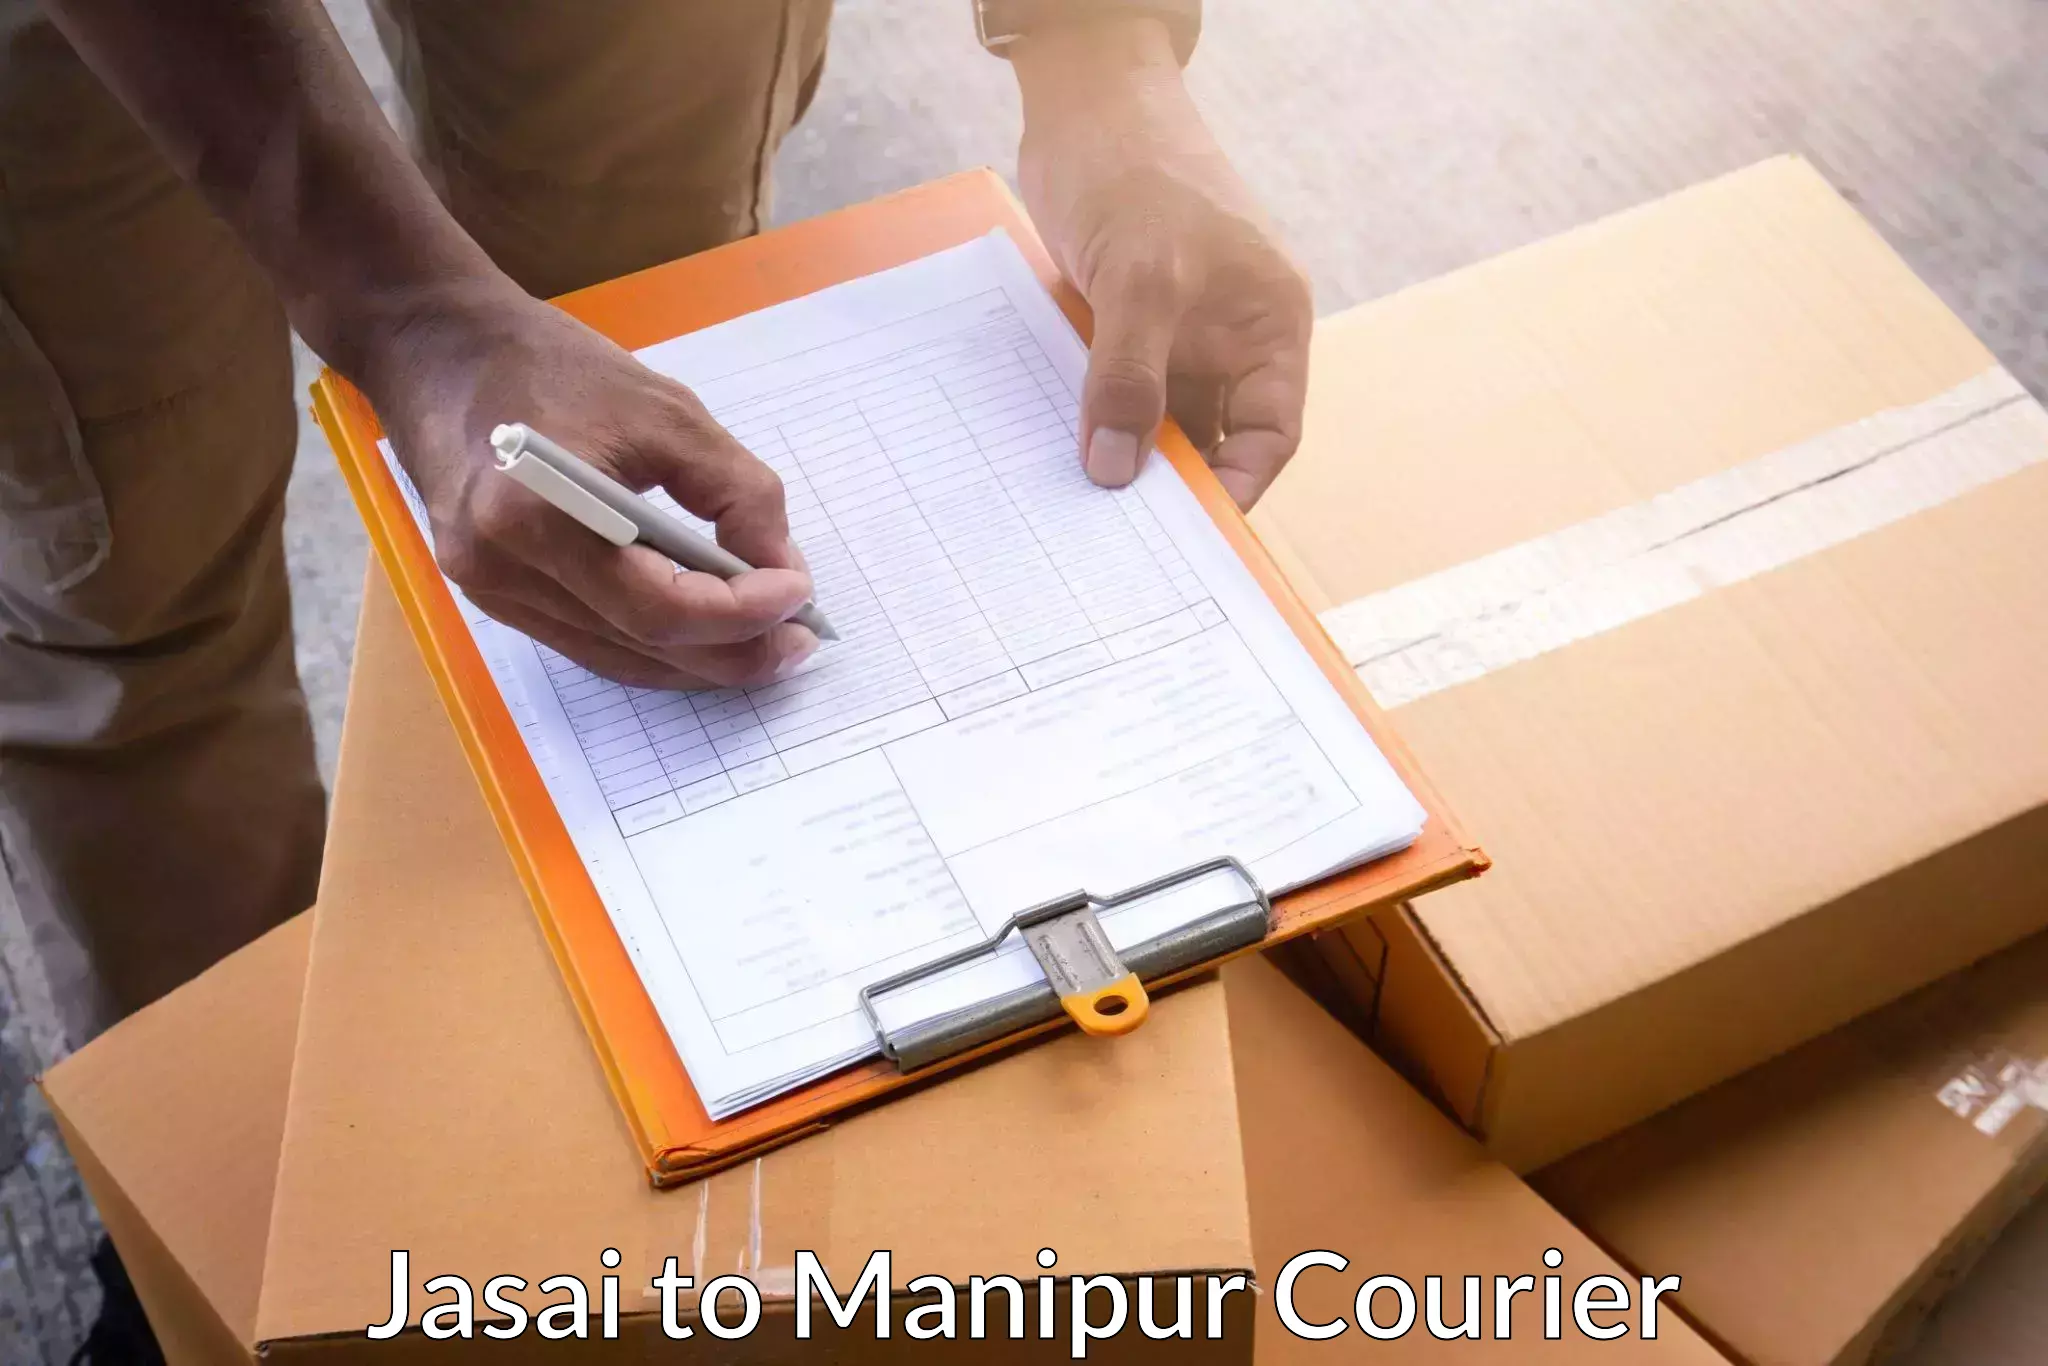 Easy return solutions Jasai to Manipur